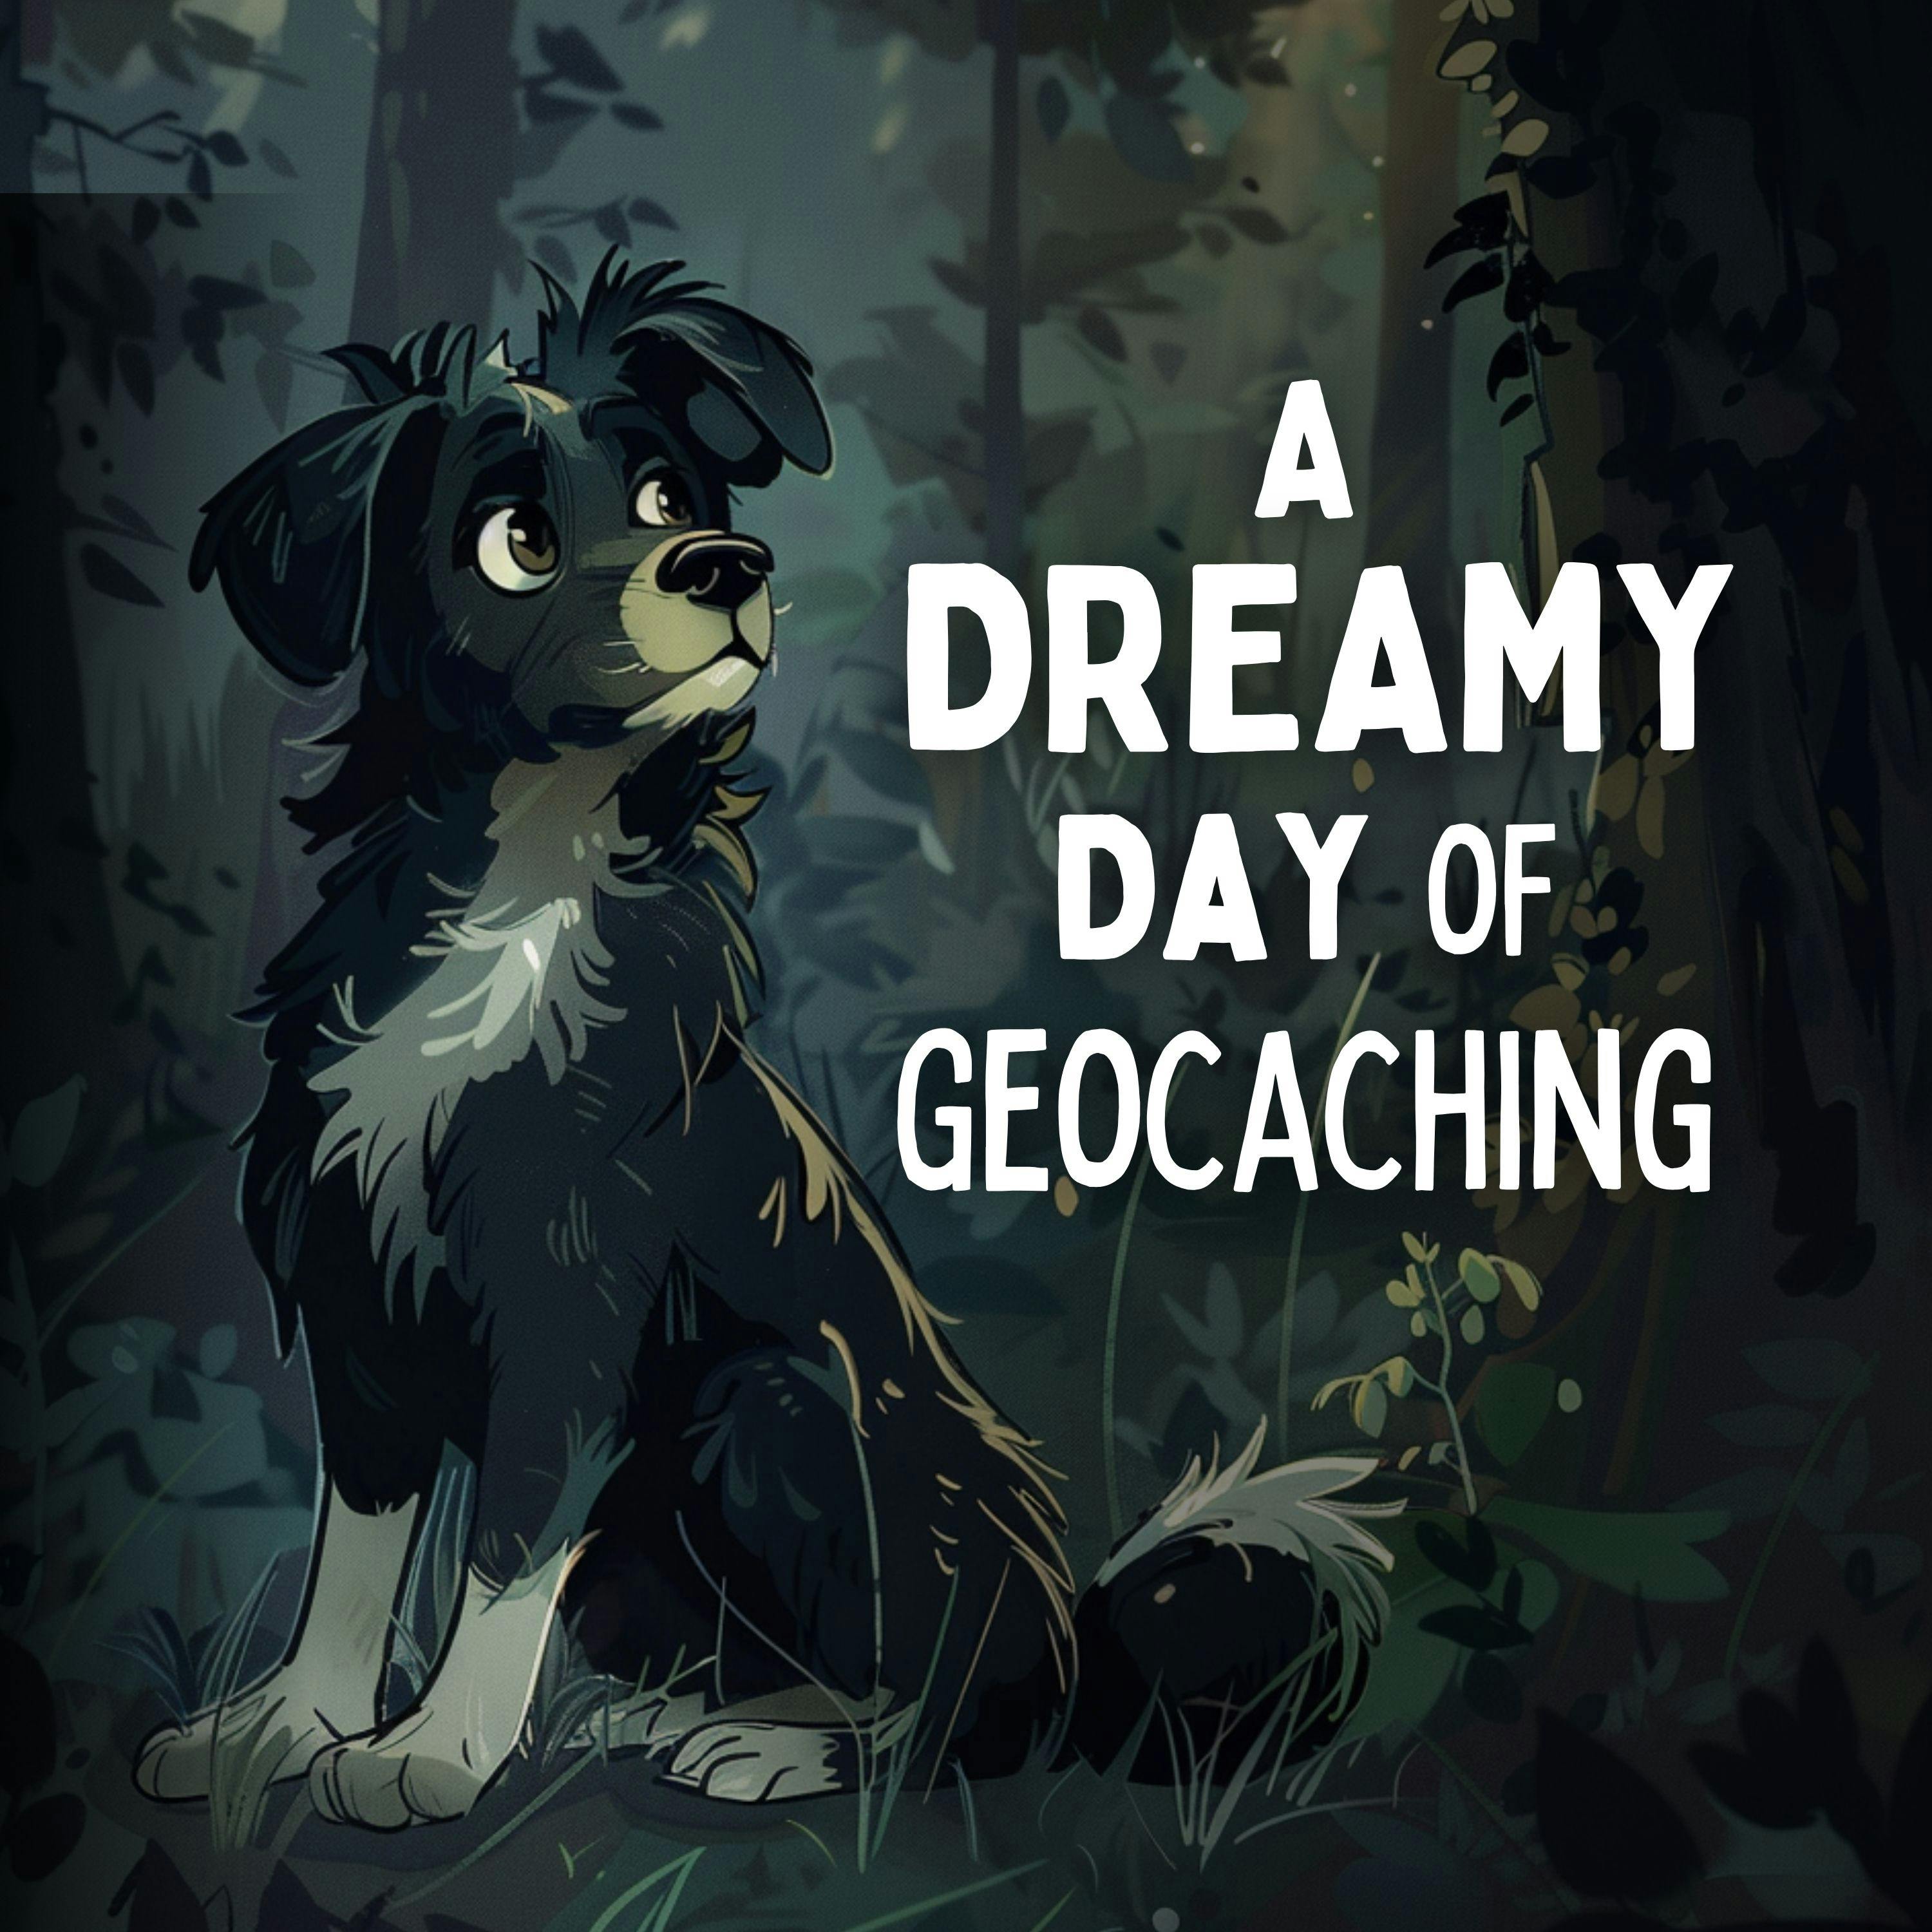 A Dreamy Day of Geocaching